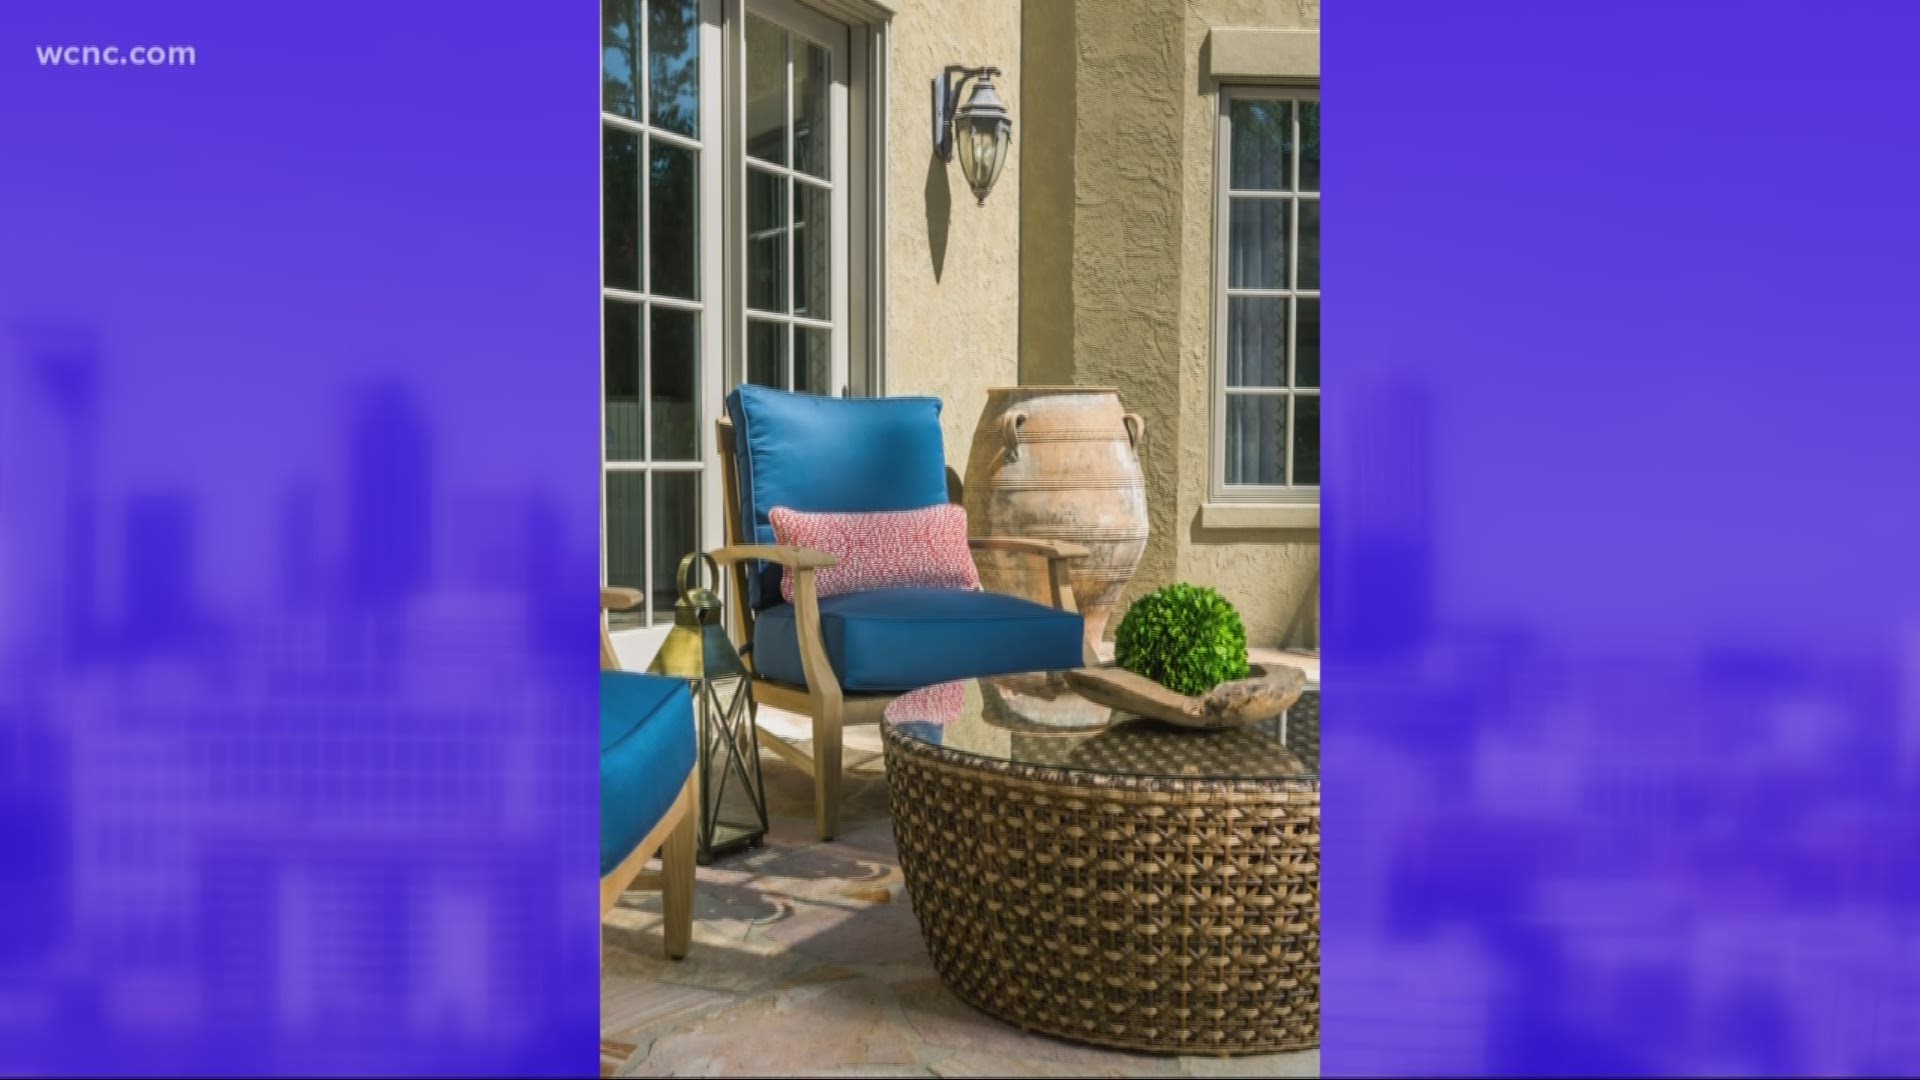 Spruce up your patio this summer with these design and décor tips from interior designer, Lauren Clement.